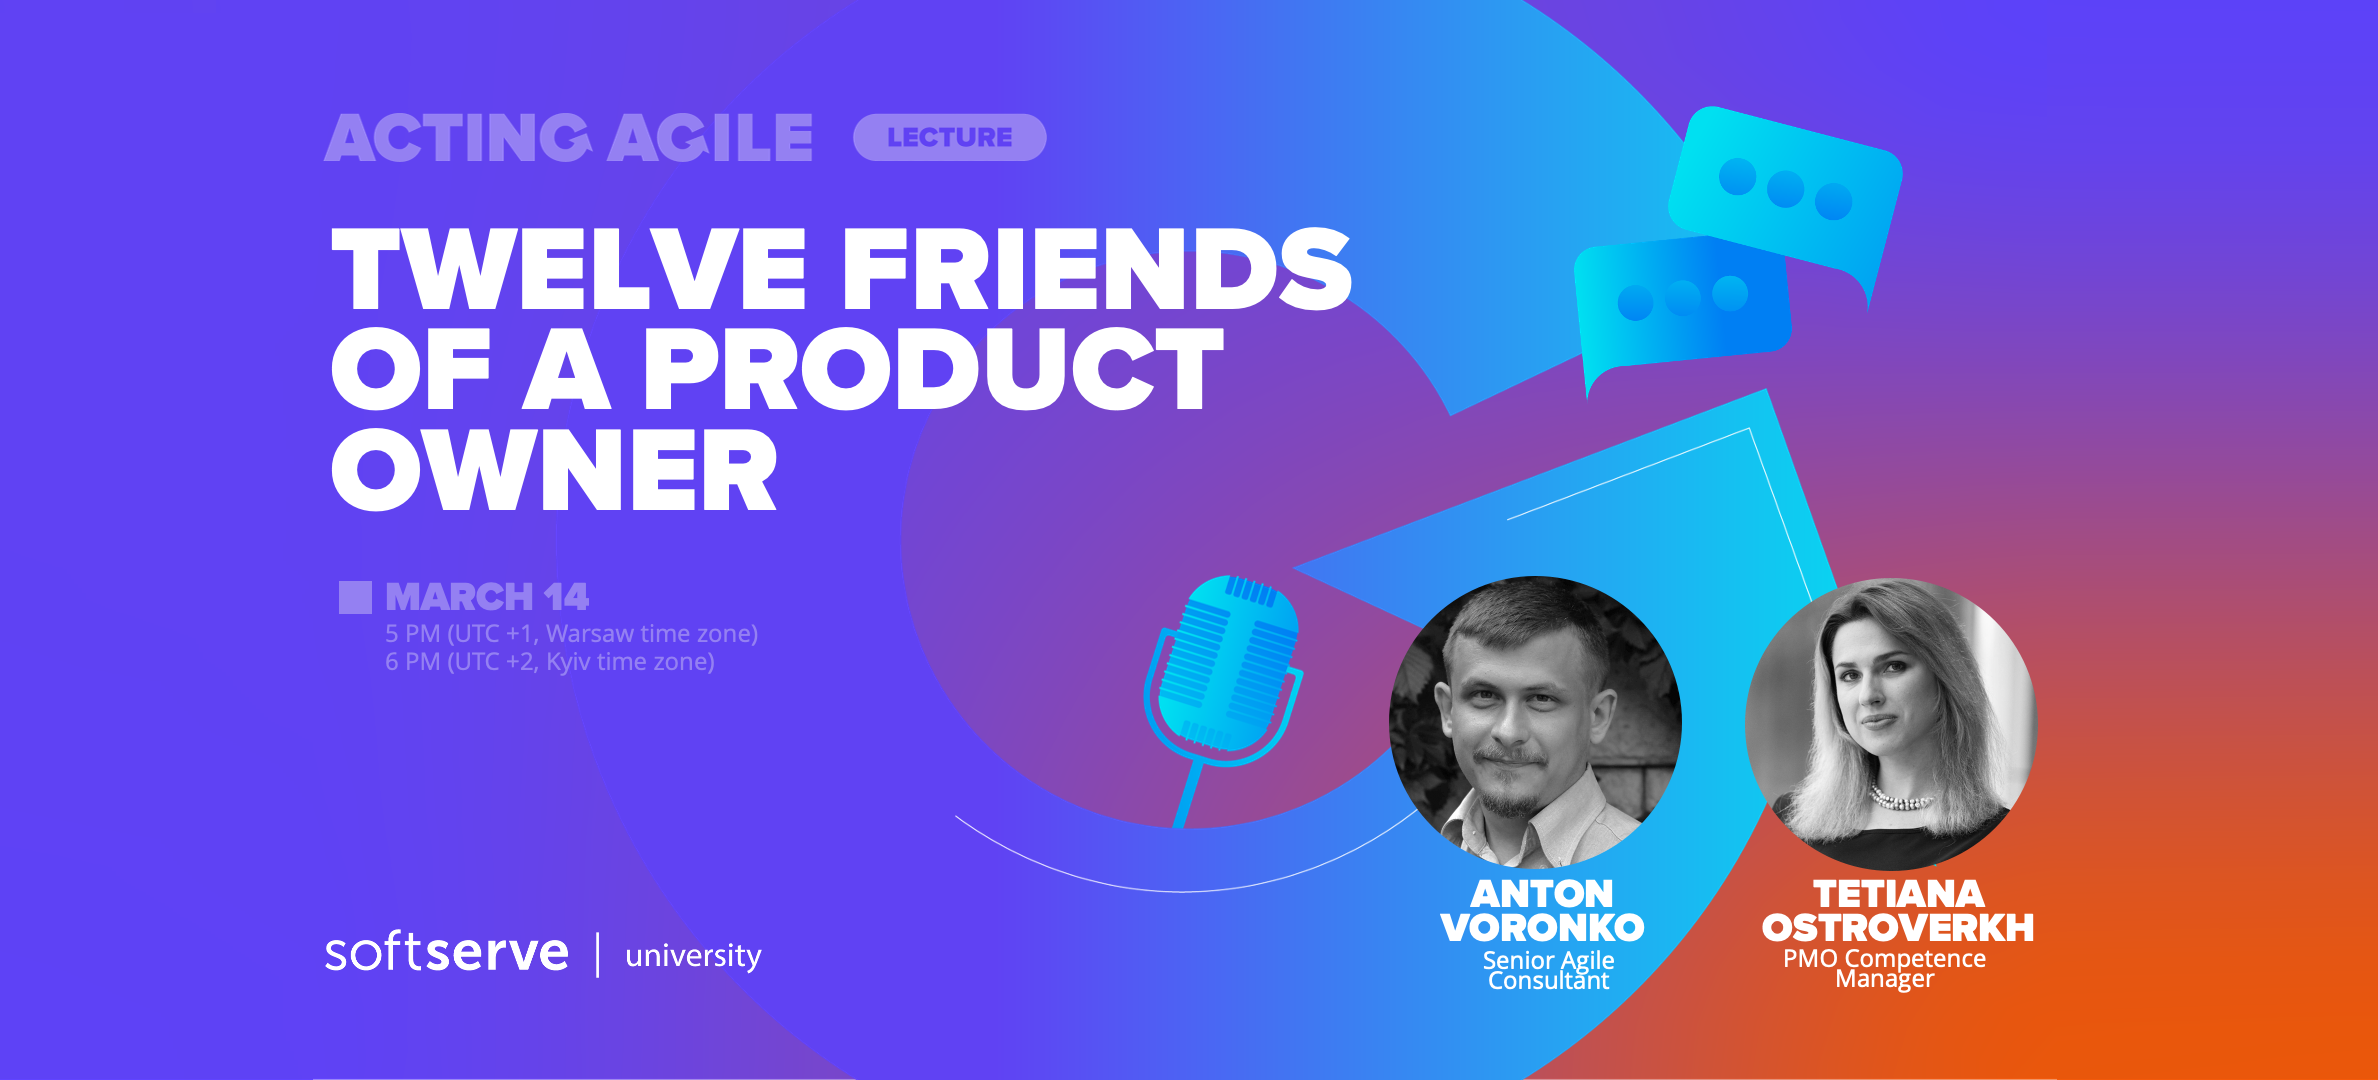 Twelve Friends of a Product Owner Lecture